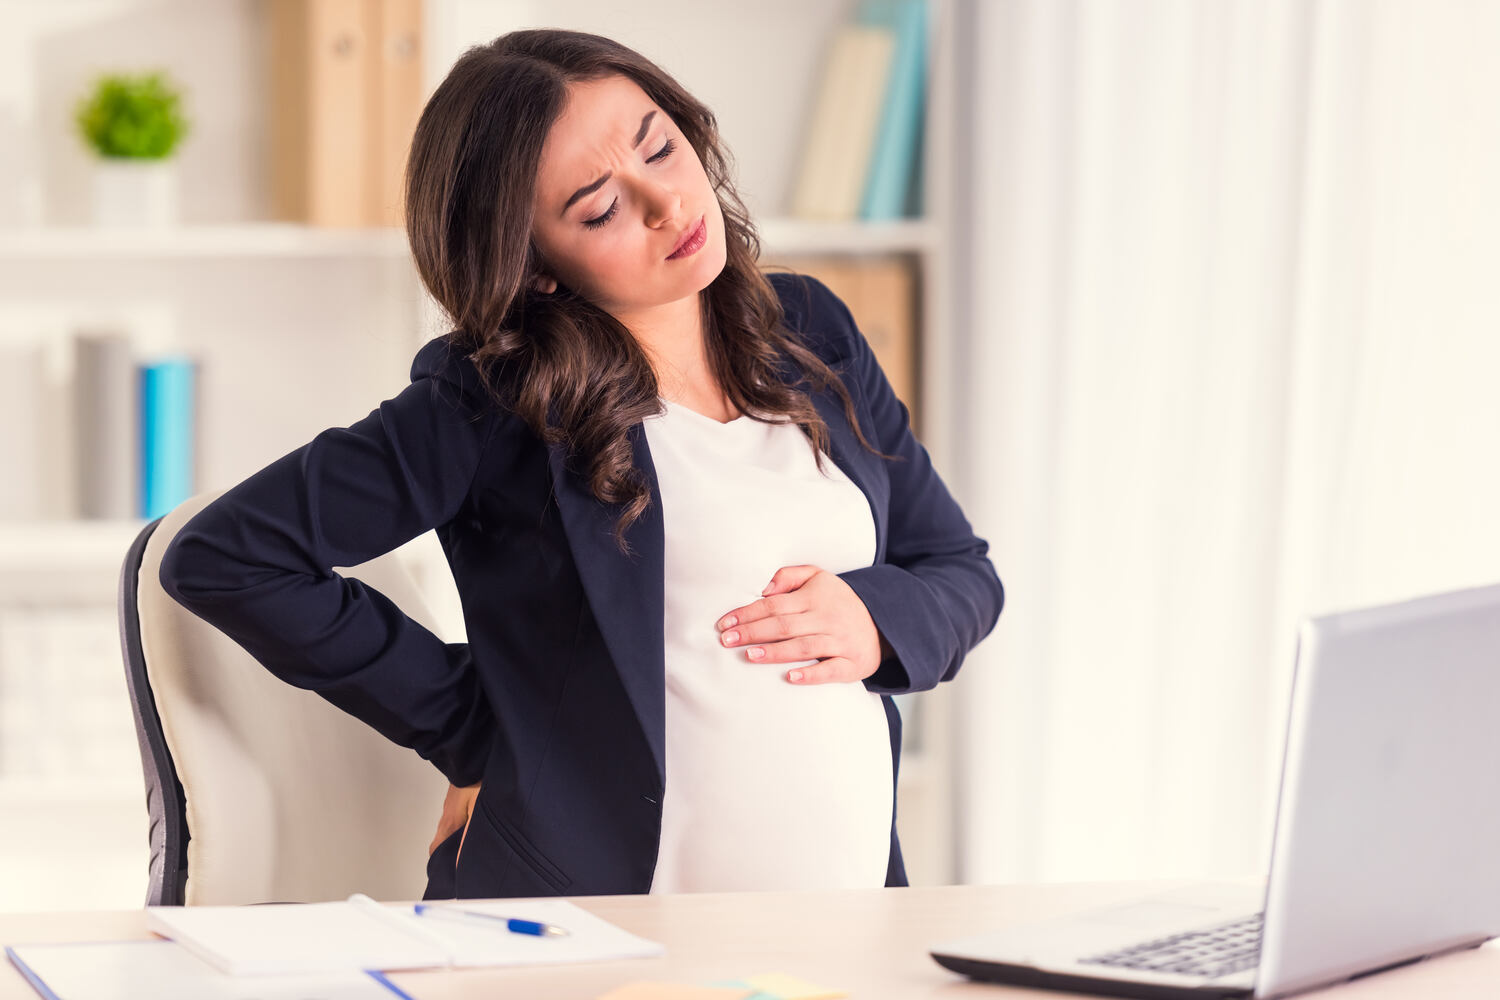 Side Effects of licorice Consumption During Pregnancy